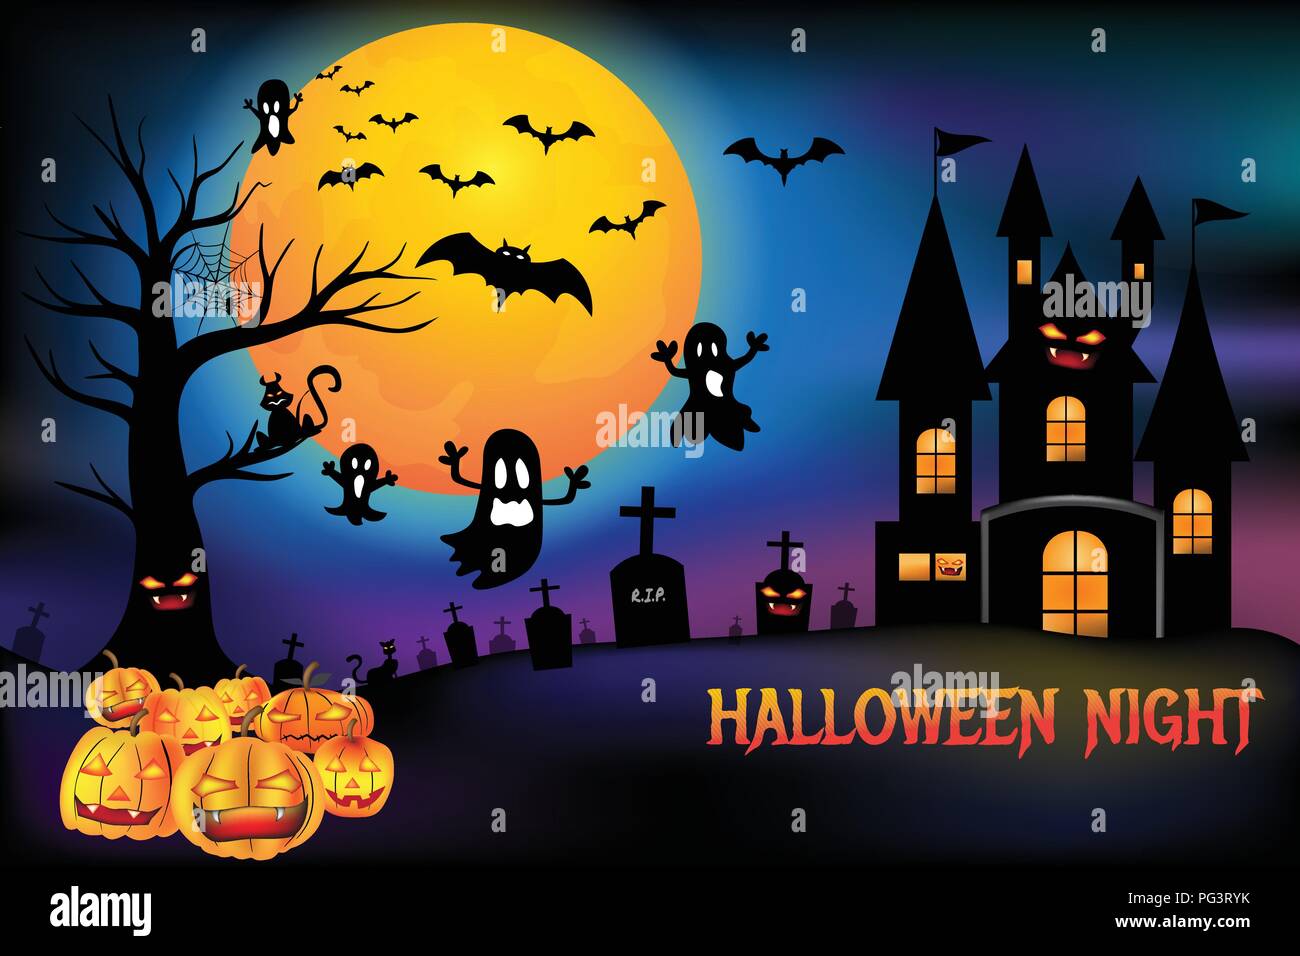 Halloween pumpkins and creepy castle, death tree with cemetery graveyard and bats with full moon background, Halloween Night party poster brochure wit Stock Vector